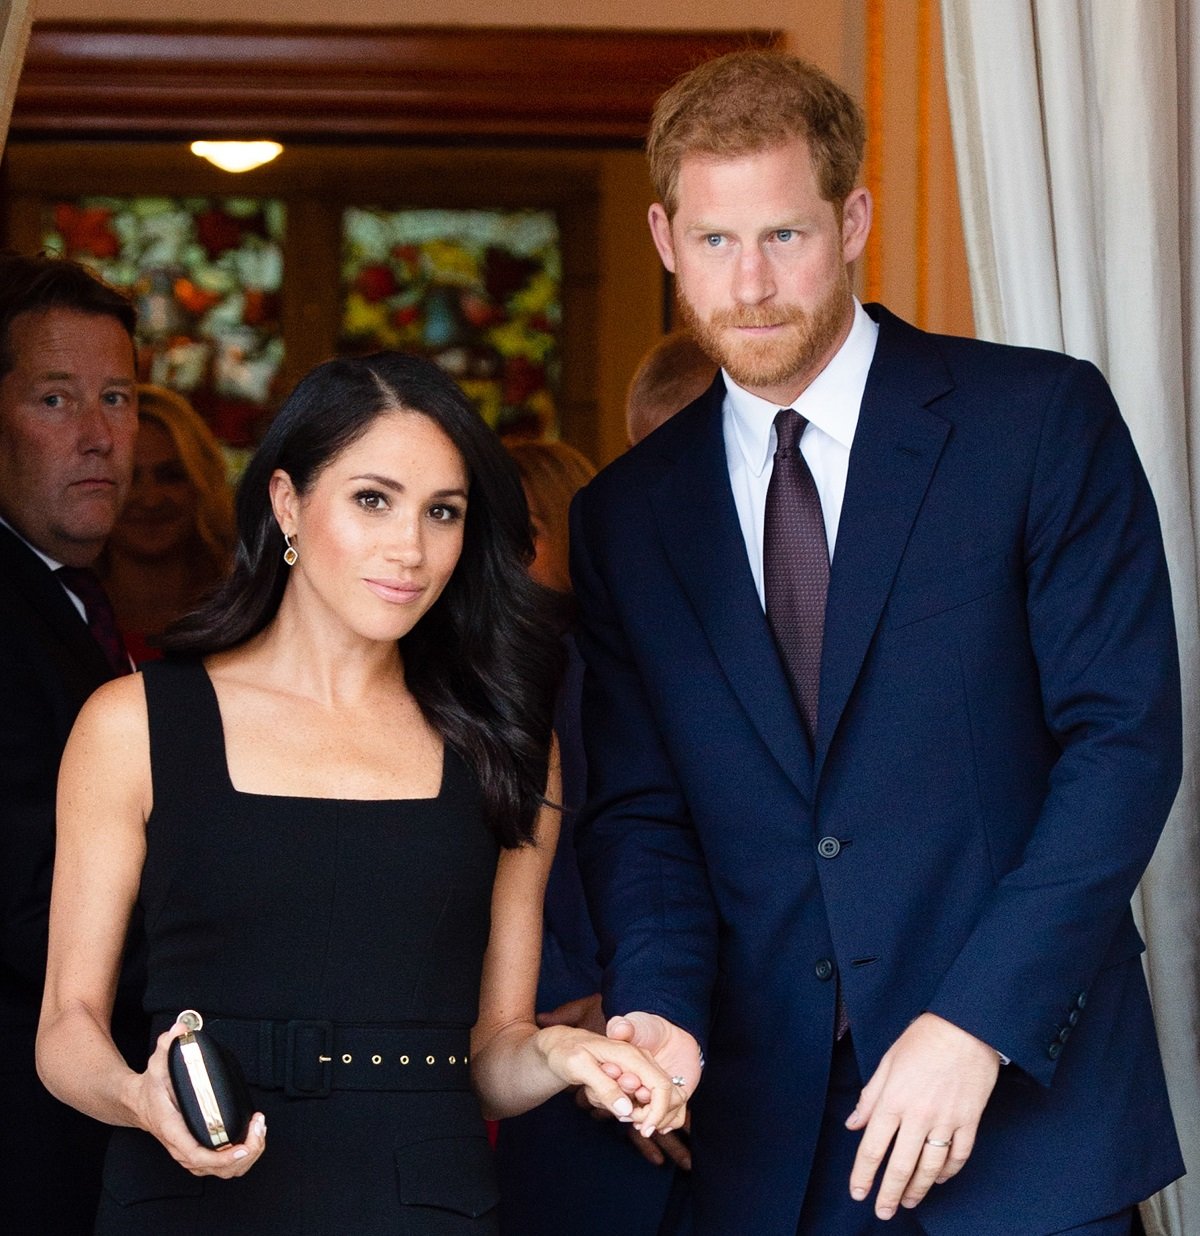 Meghan Markle and Prince Harry attending a Summer Party at the British Ambassador's residence in Ireland